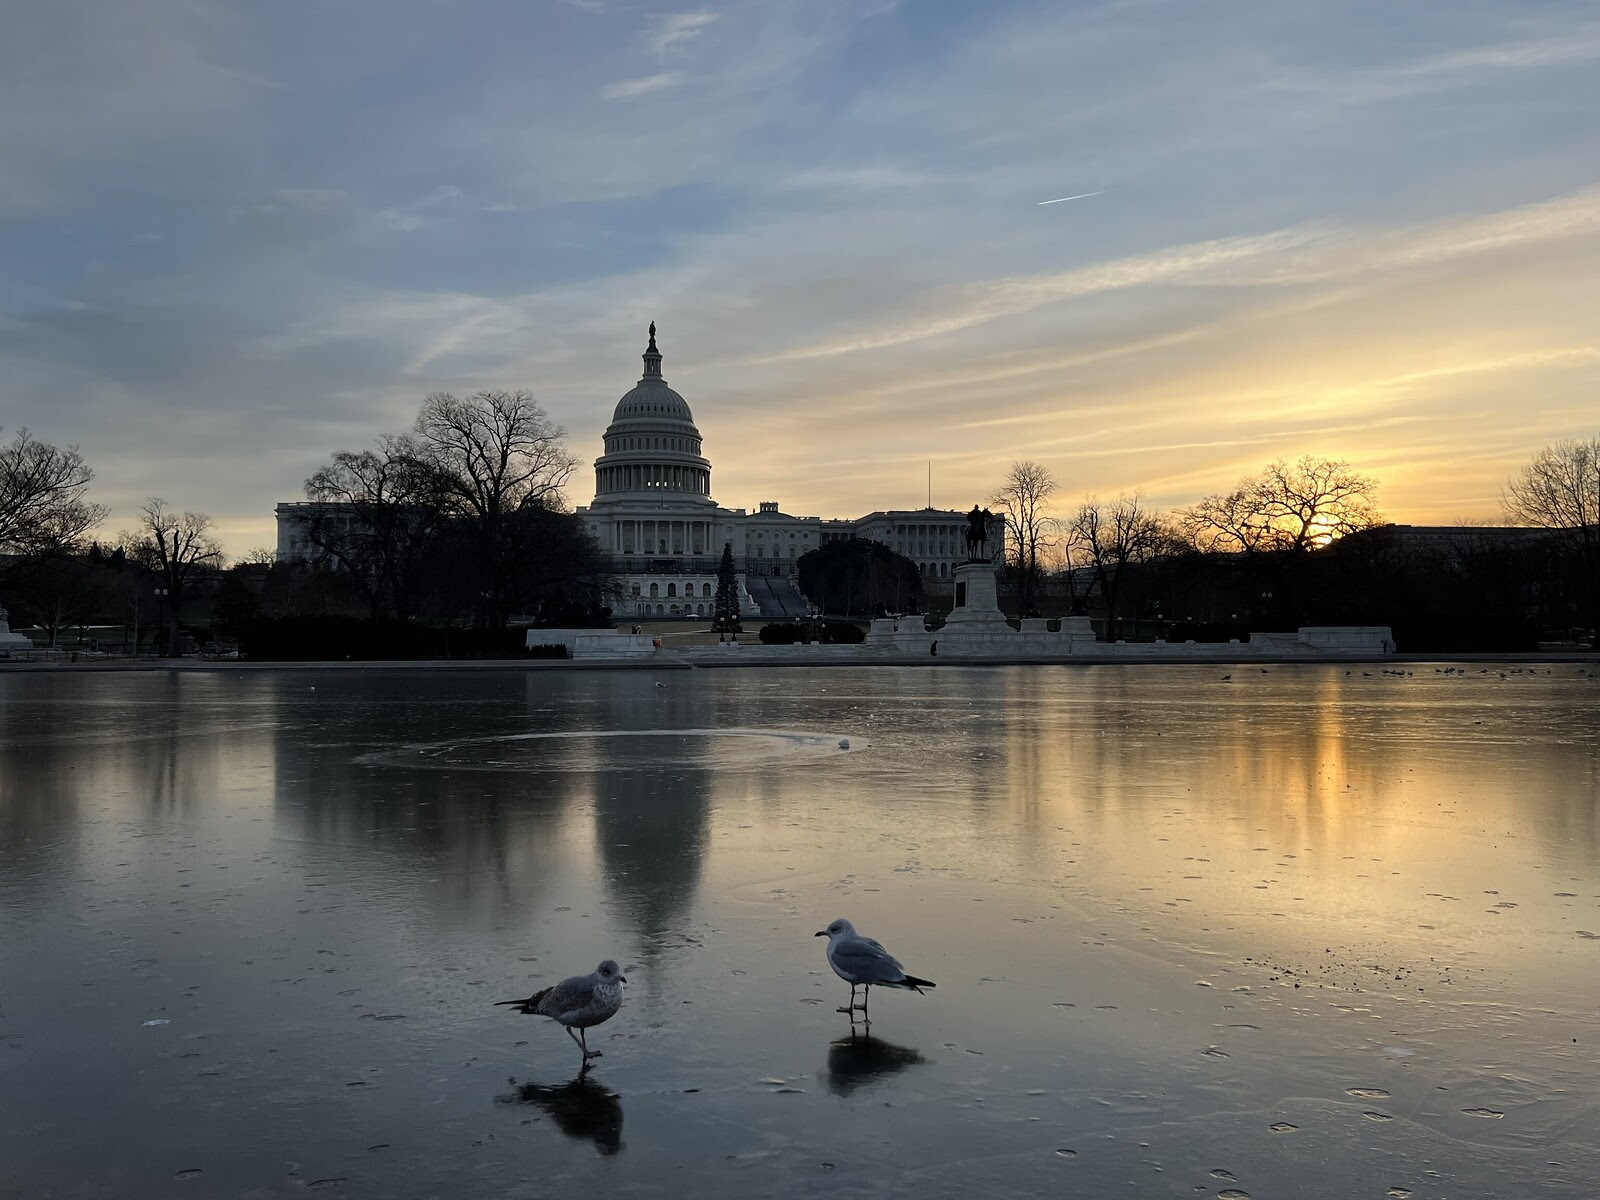 D.C.-area forecast: A frozen Saturday, with snow arriving Sunday afternoon, then changing to ice and rain